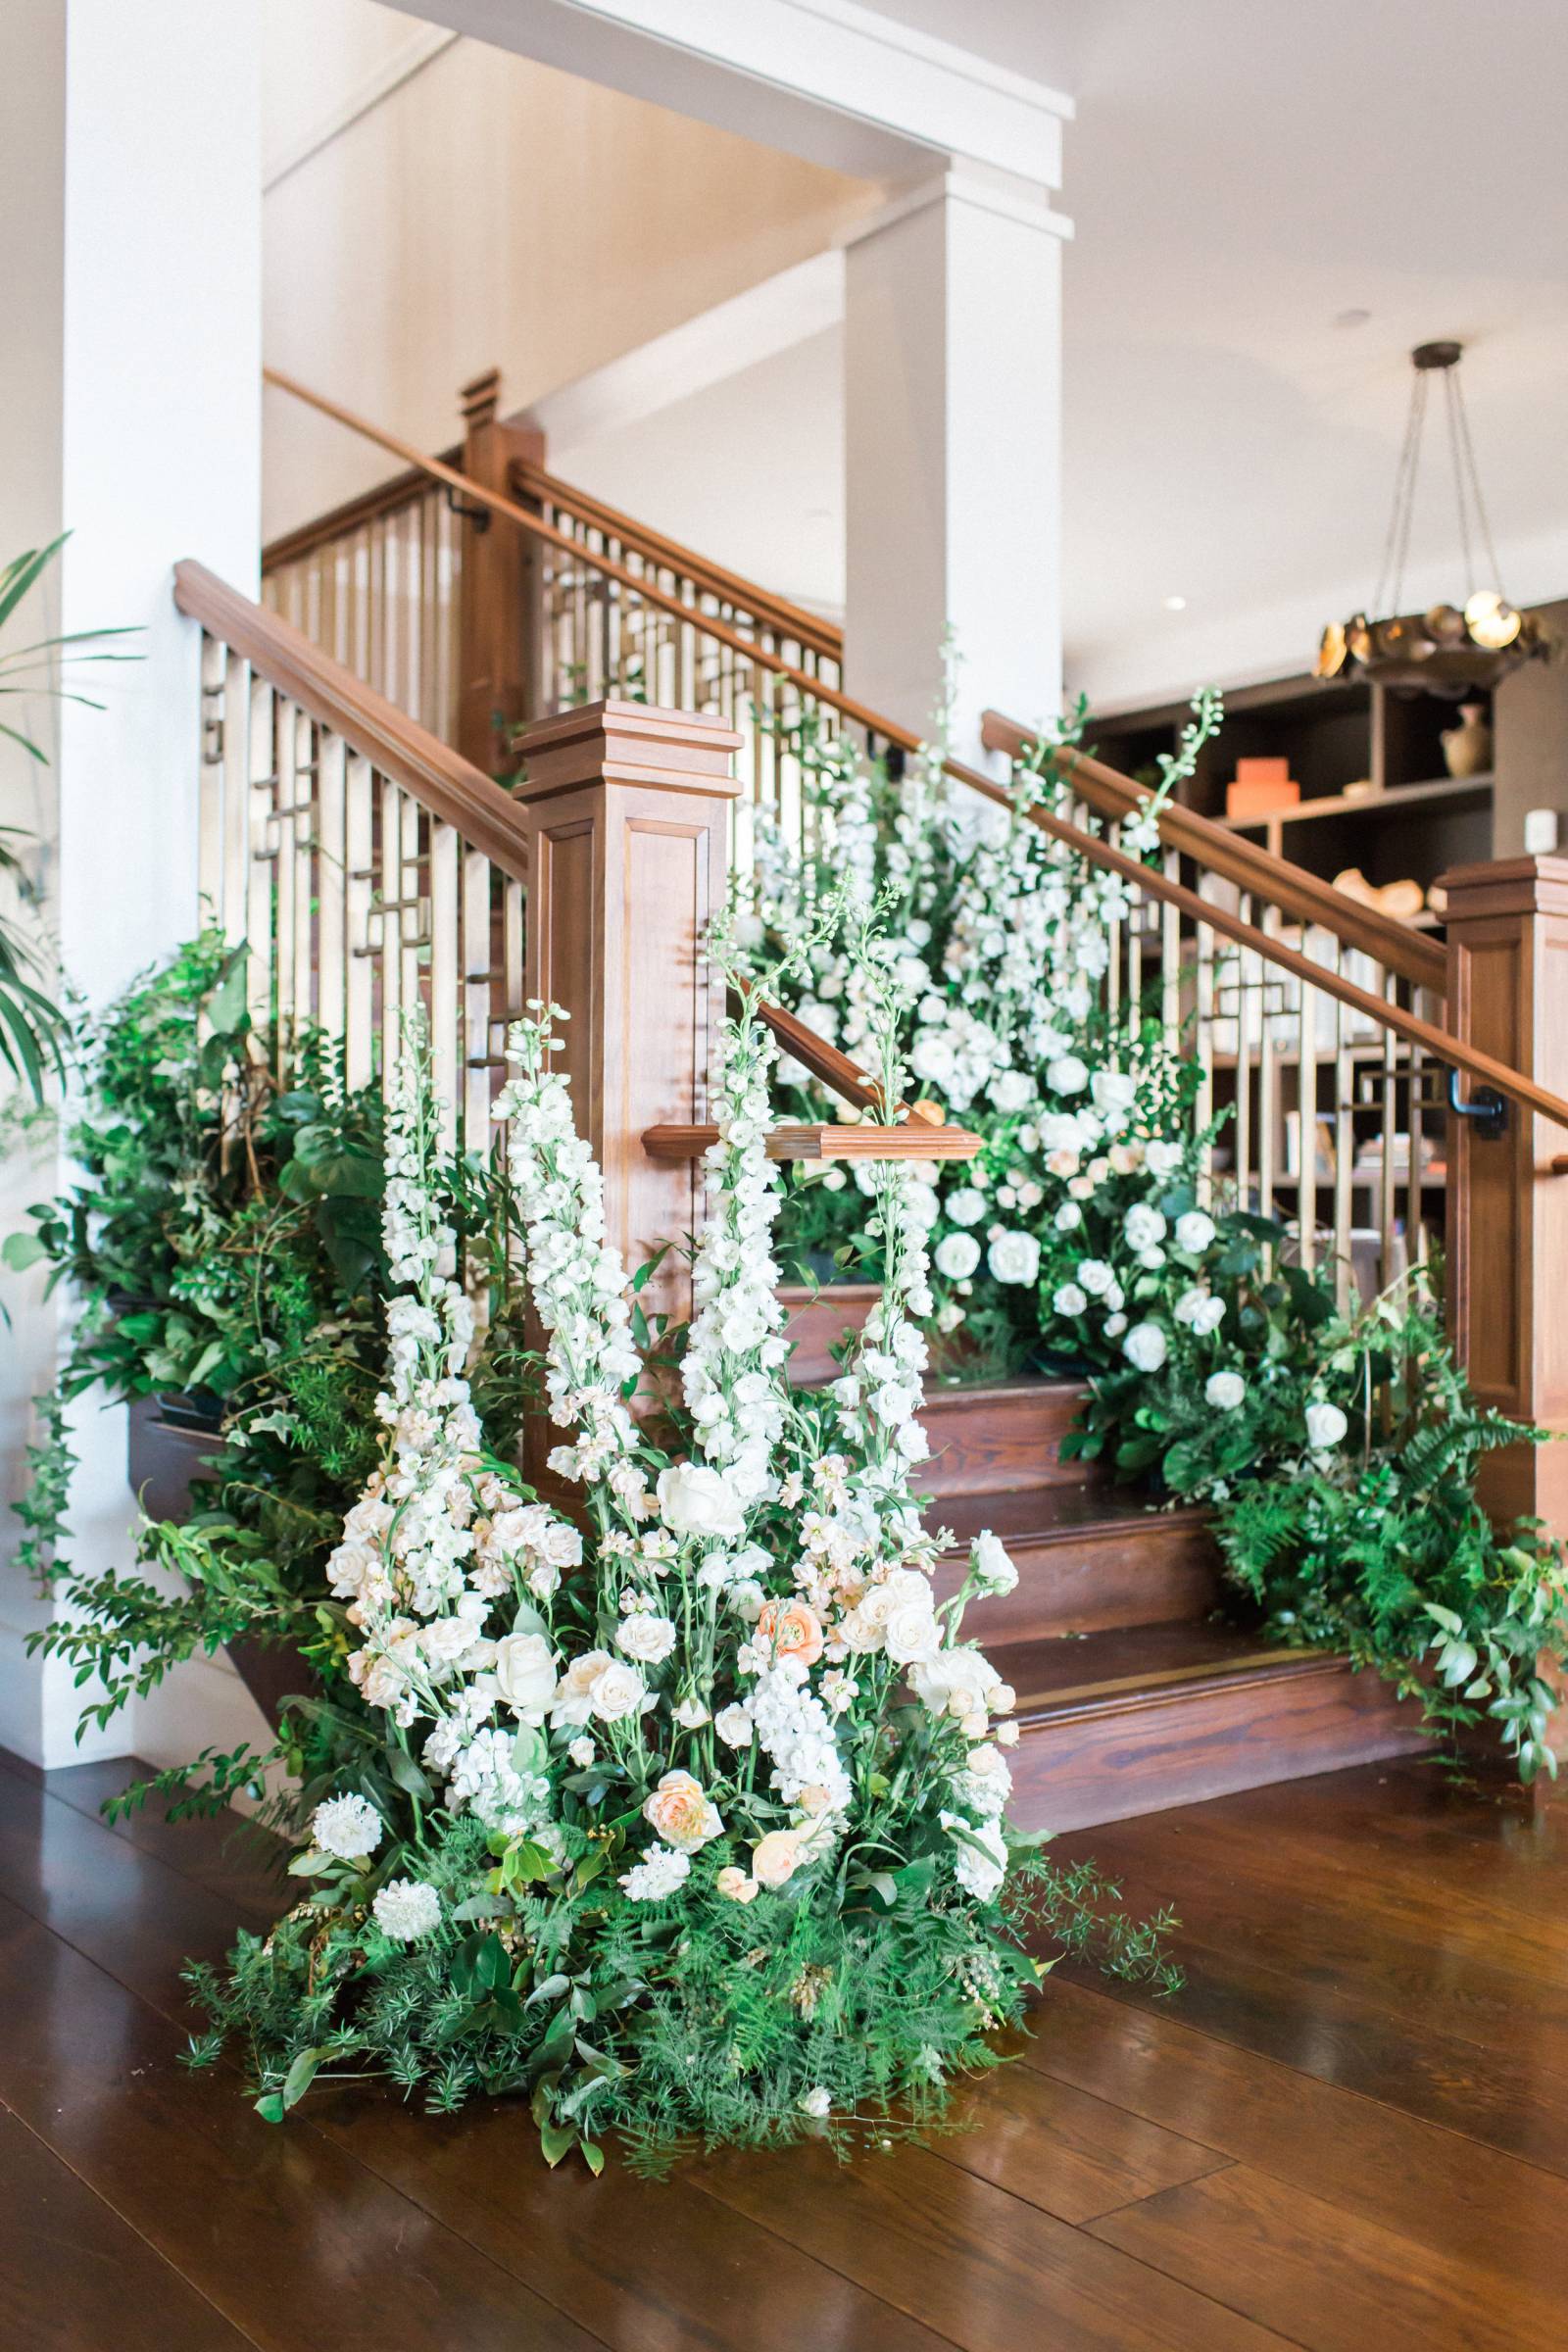 10 Of Our Favorite Floral Installations